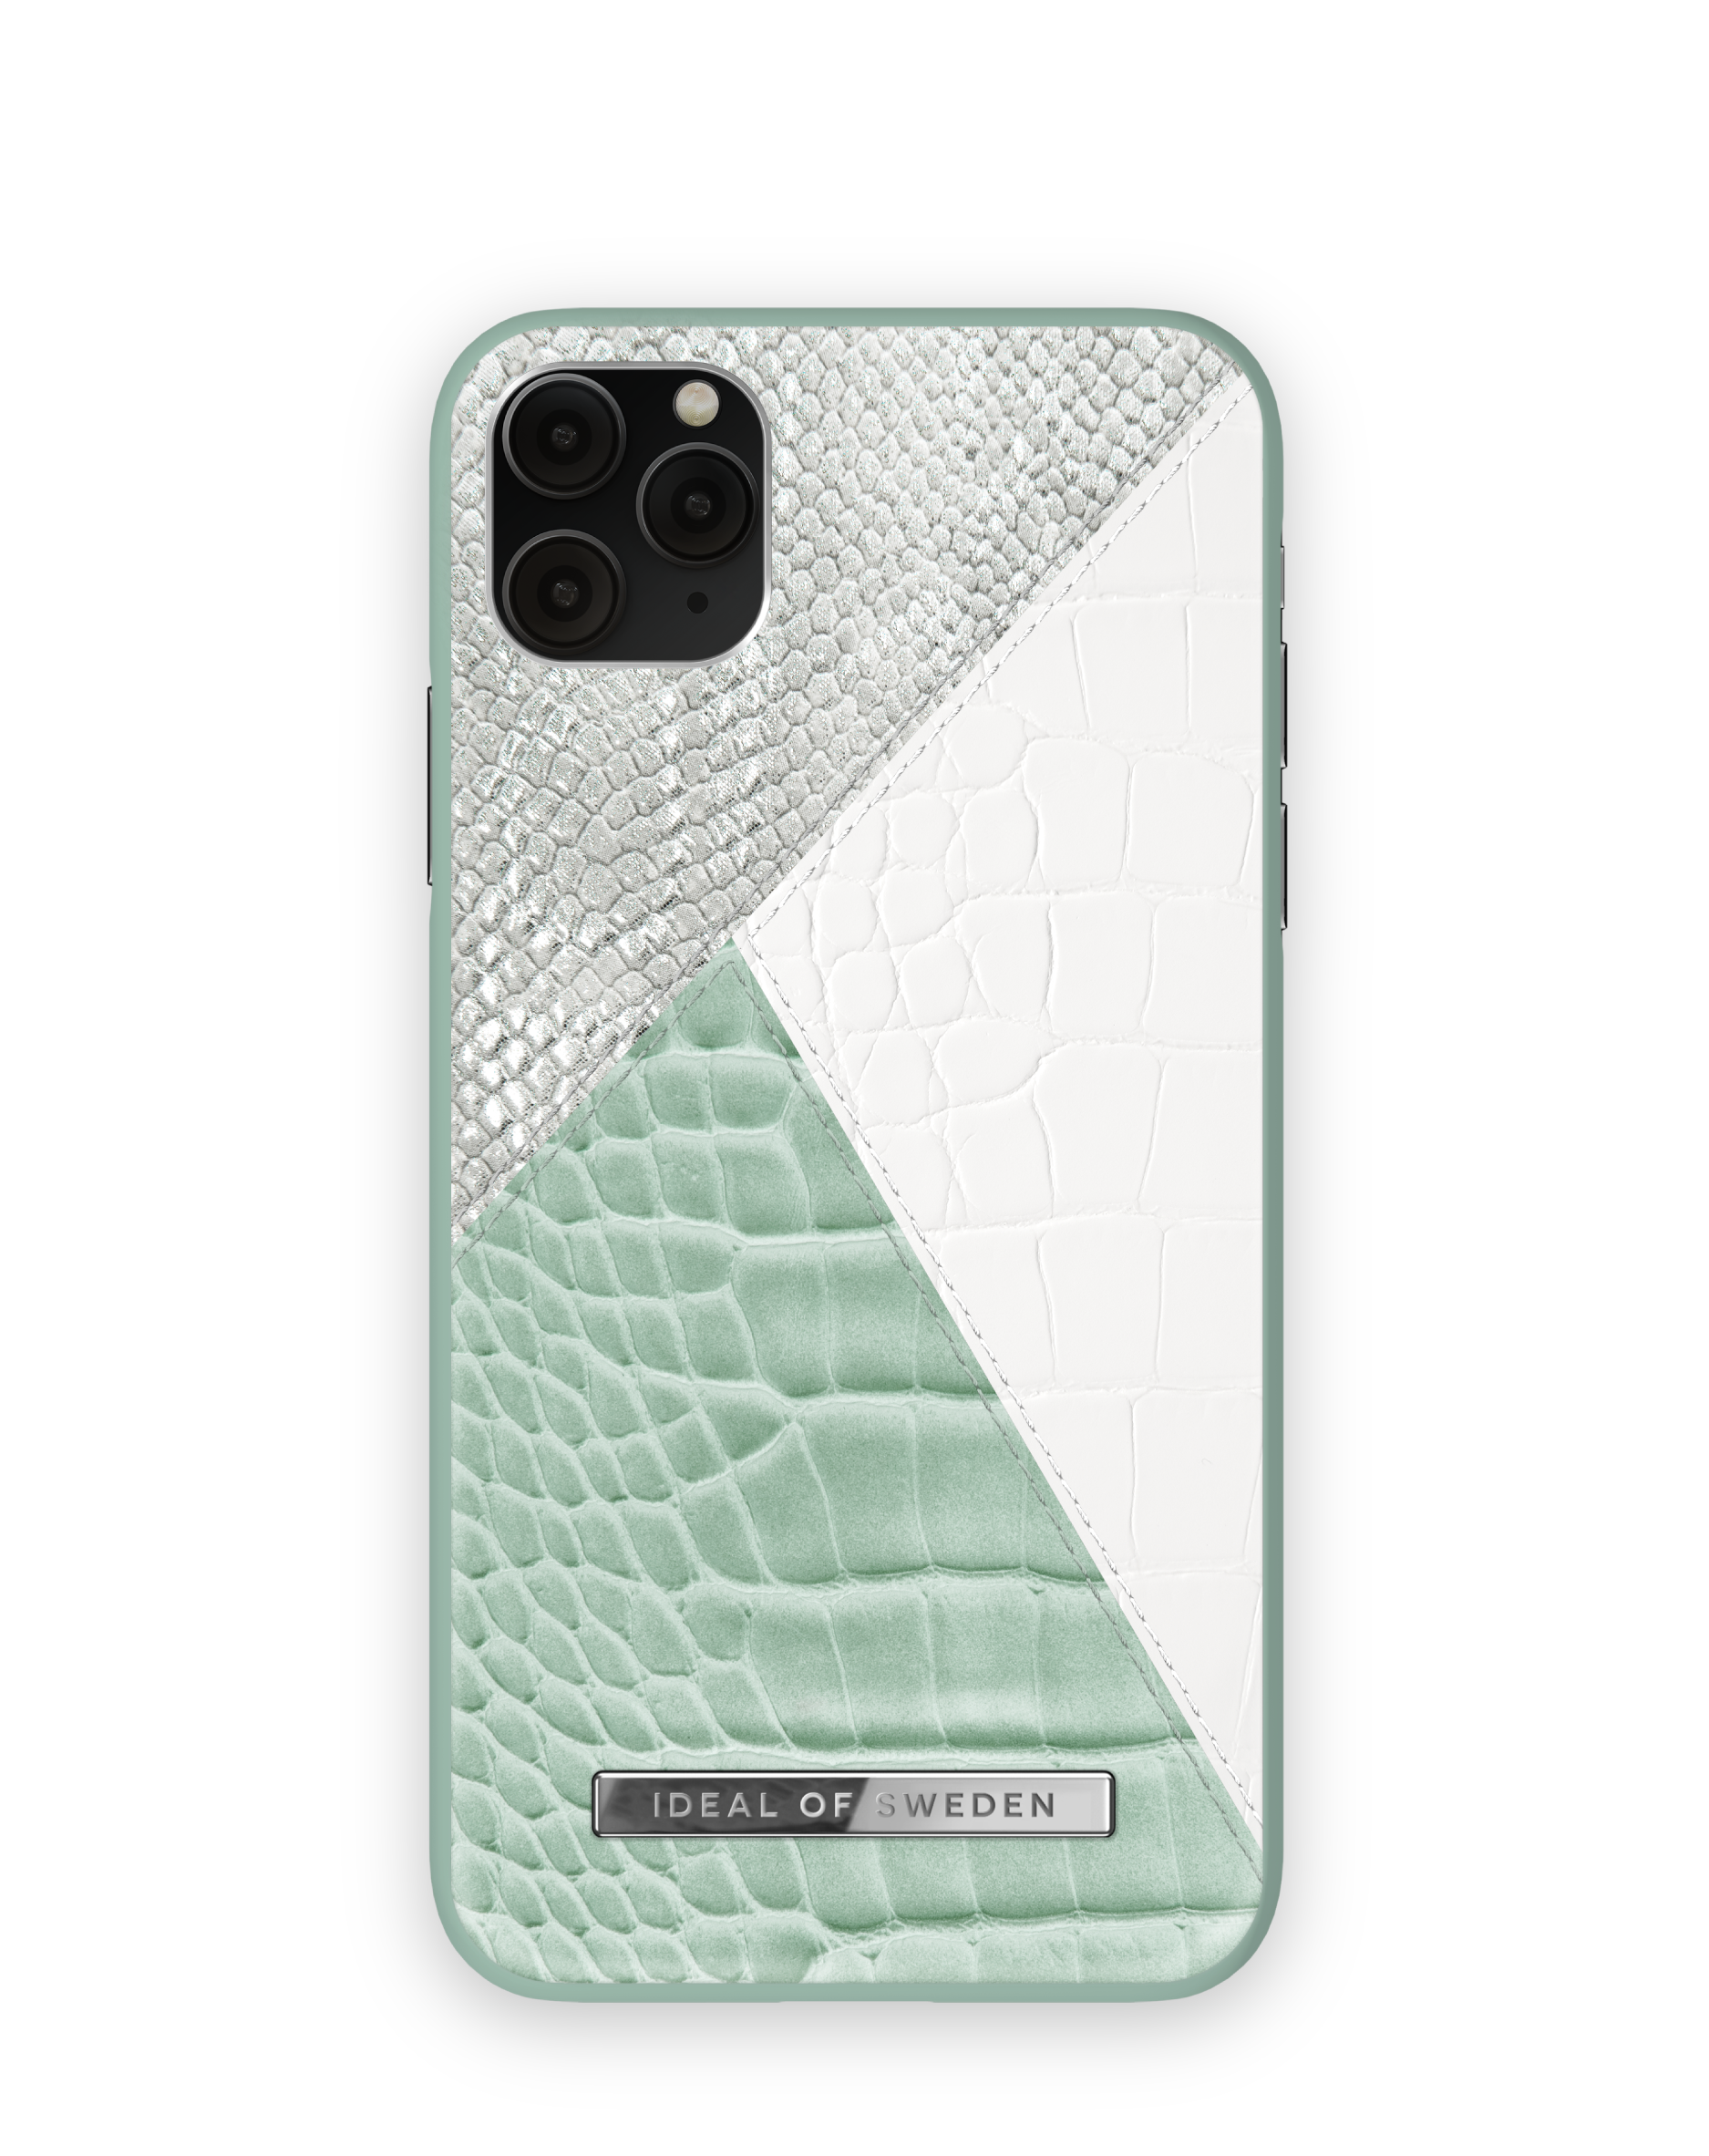 Mint iPhone Max, OF Snake SWEDEN Apple Backcover, Max, IDEAL iPhone 11 IDACSS21-I1965-268, Palladian XS Apple Pro Apple,